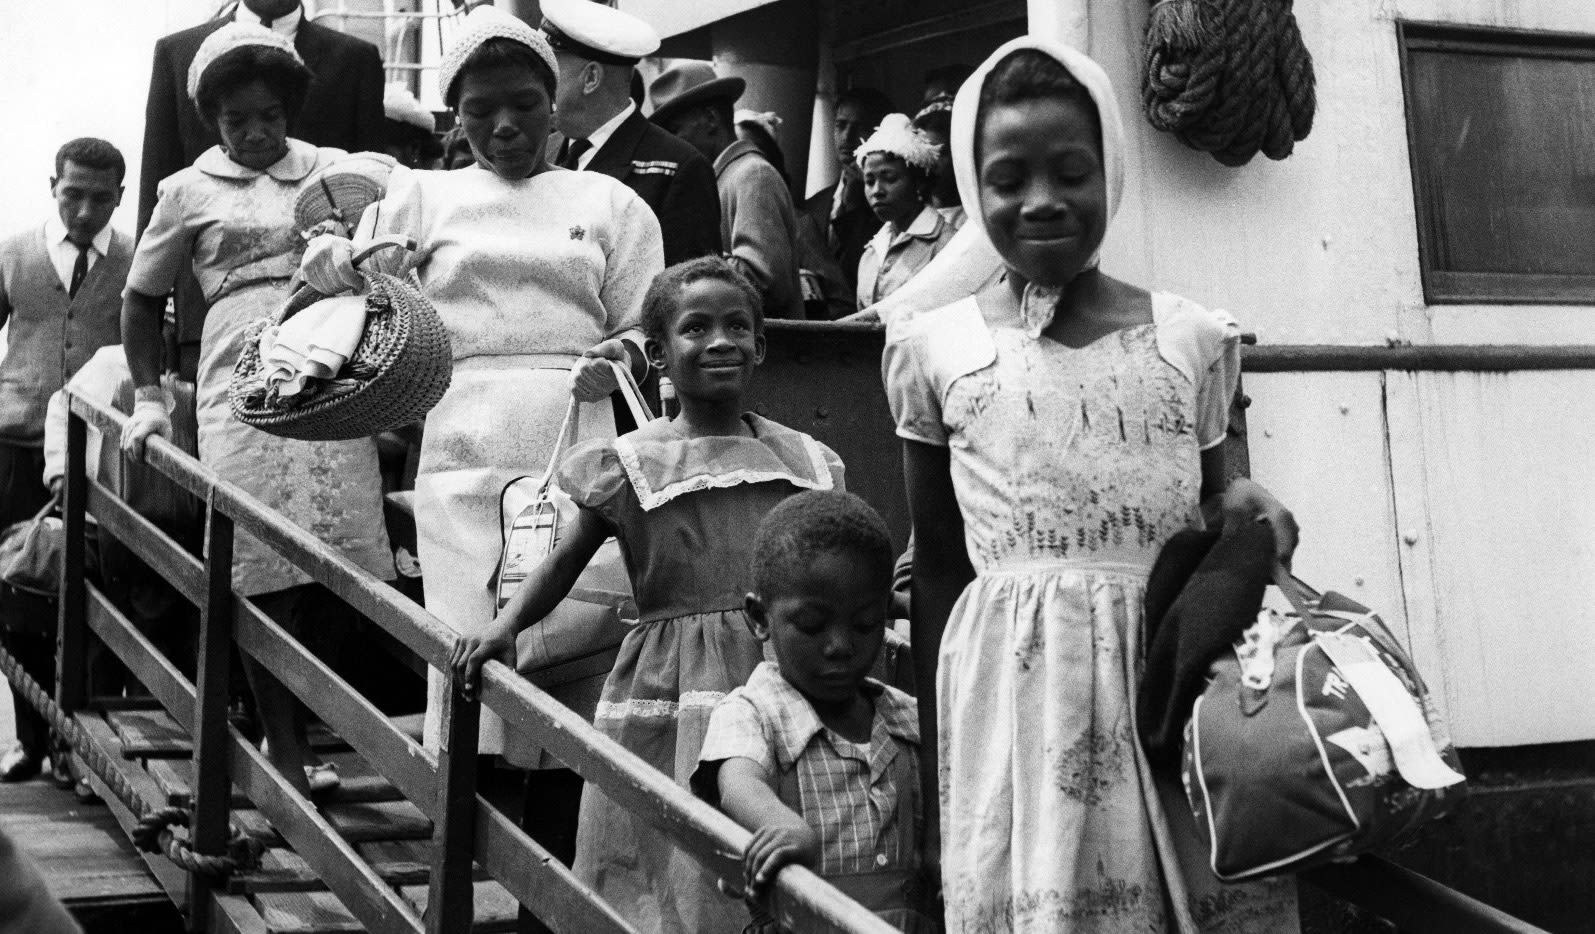 black and white photograph of several black people descending a gangway from a ship